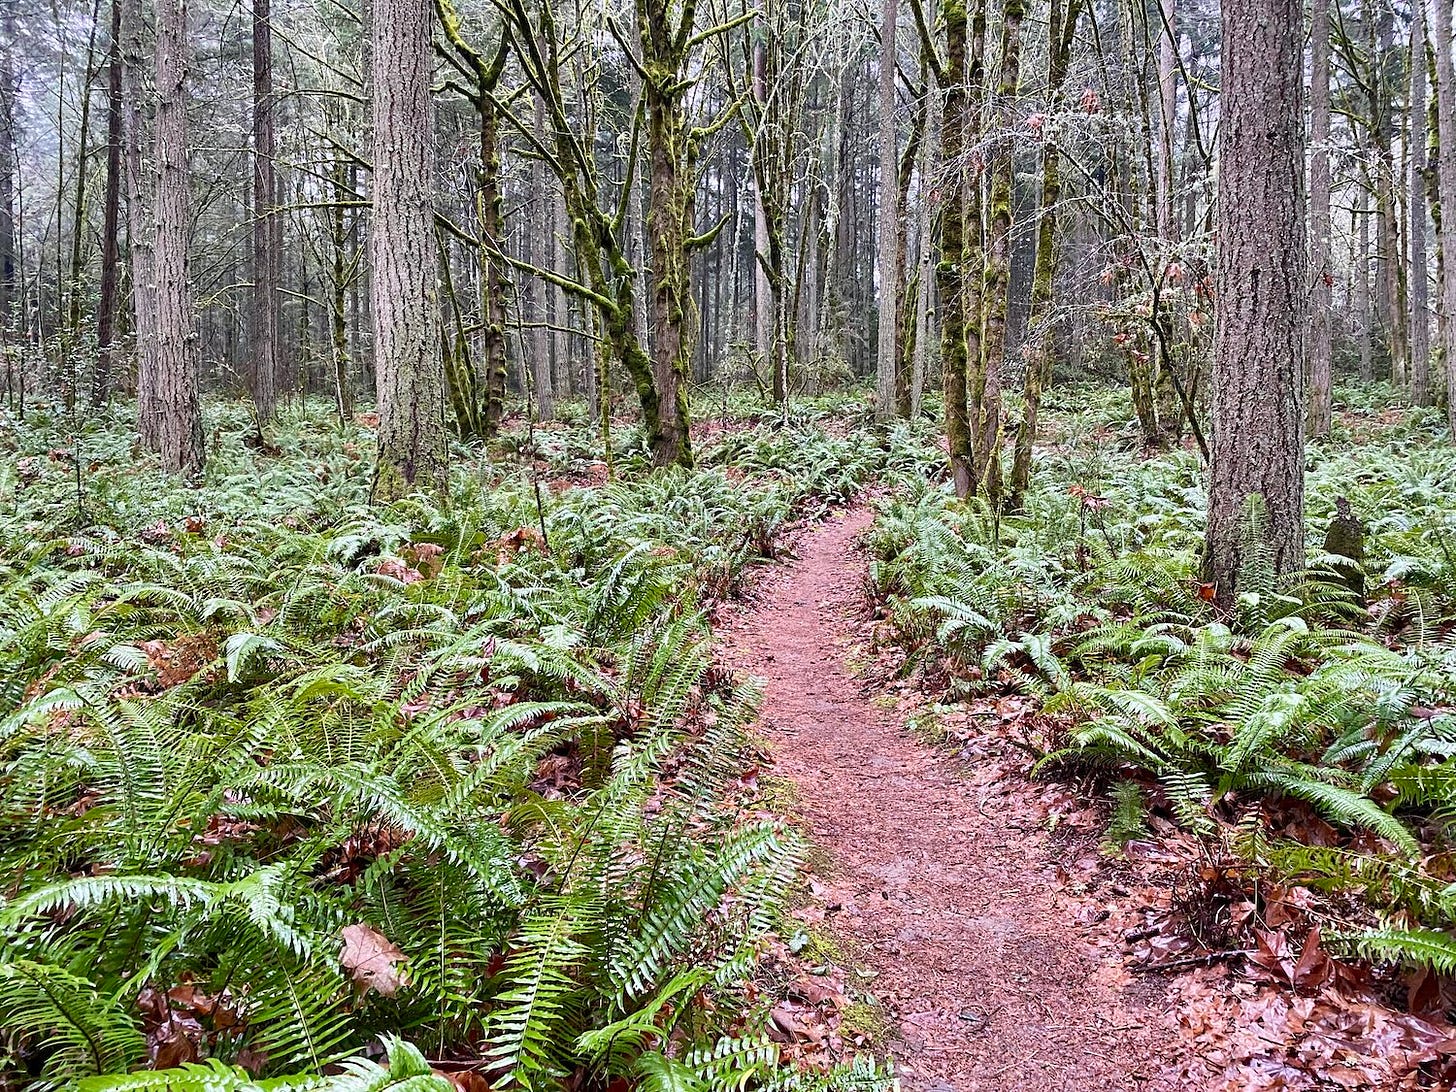 A scene of a wintry forest with no leaves on the trees, but lots of bright green ferns across the forest floor. A trail leads away from the viewpoint.